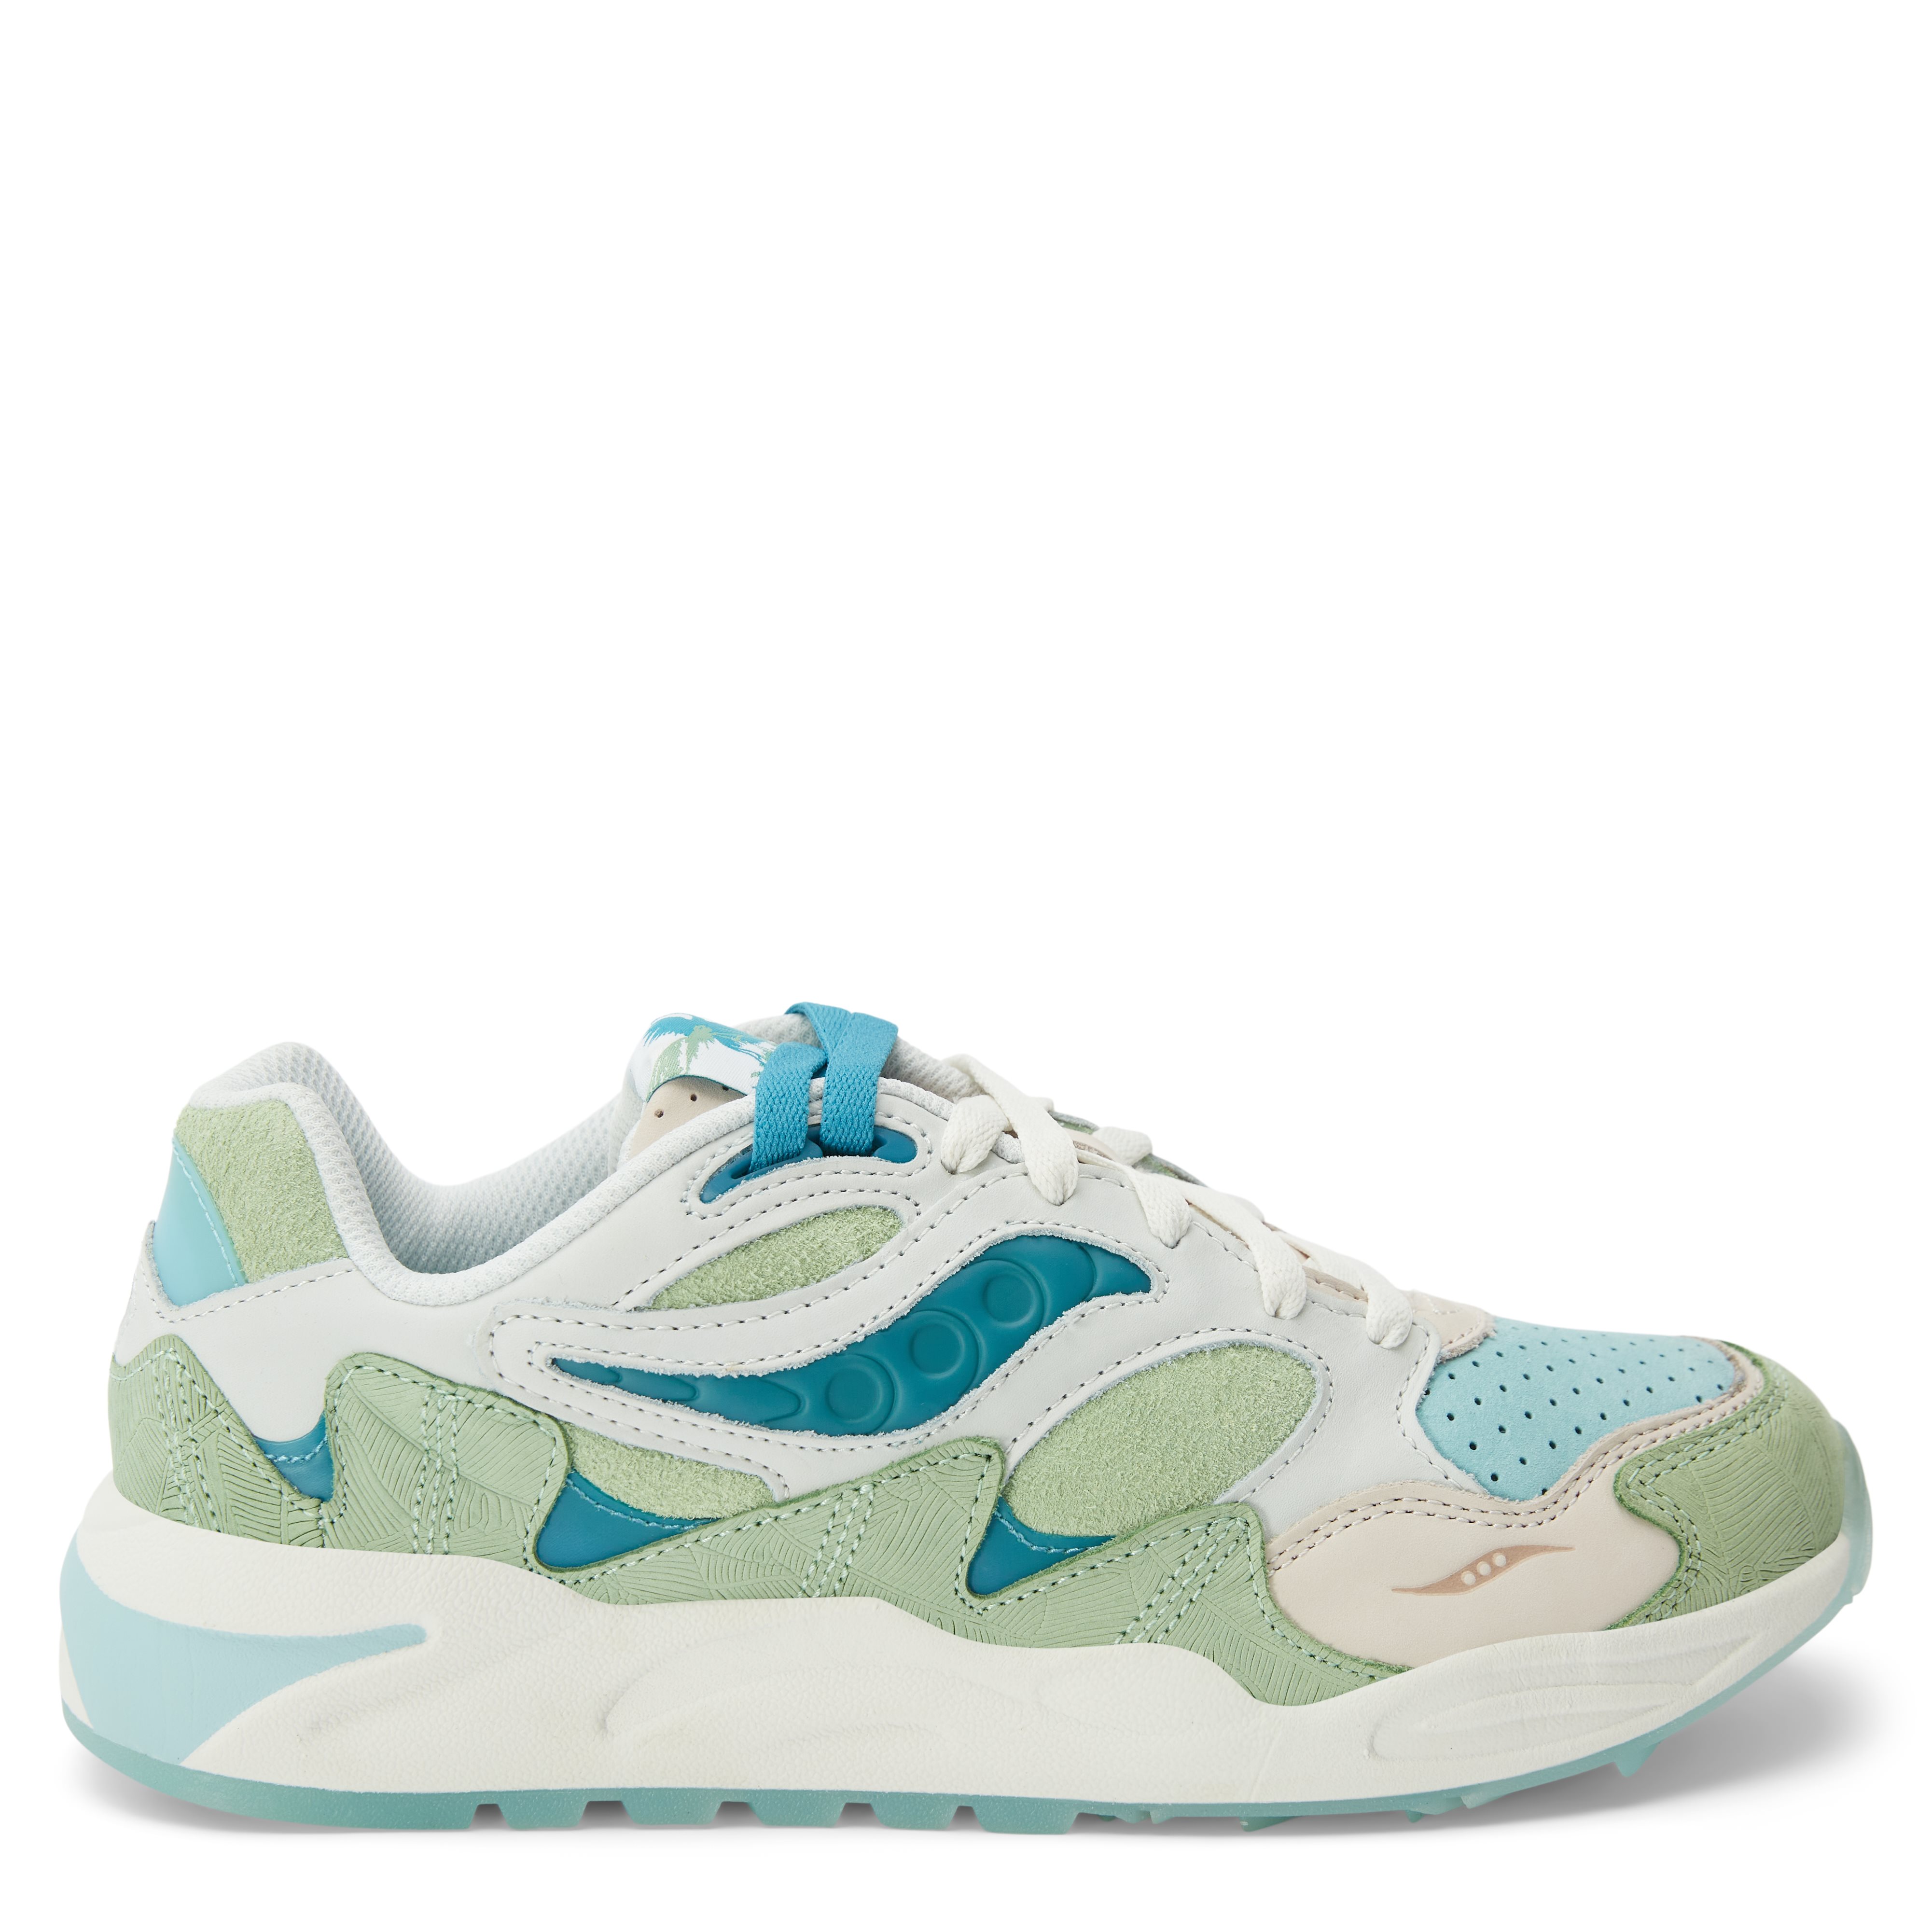 Saucony Shoes GRID SHADOW 2 S70782 Green